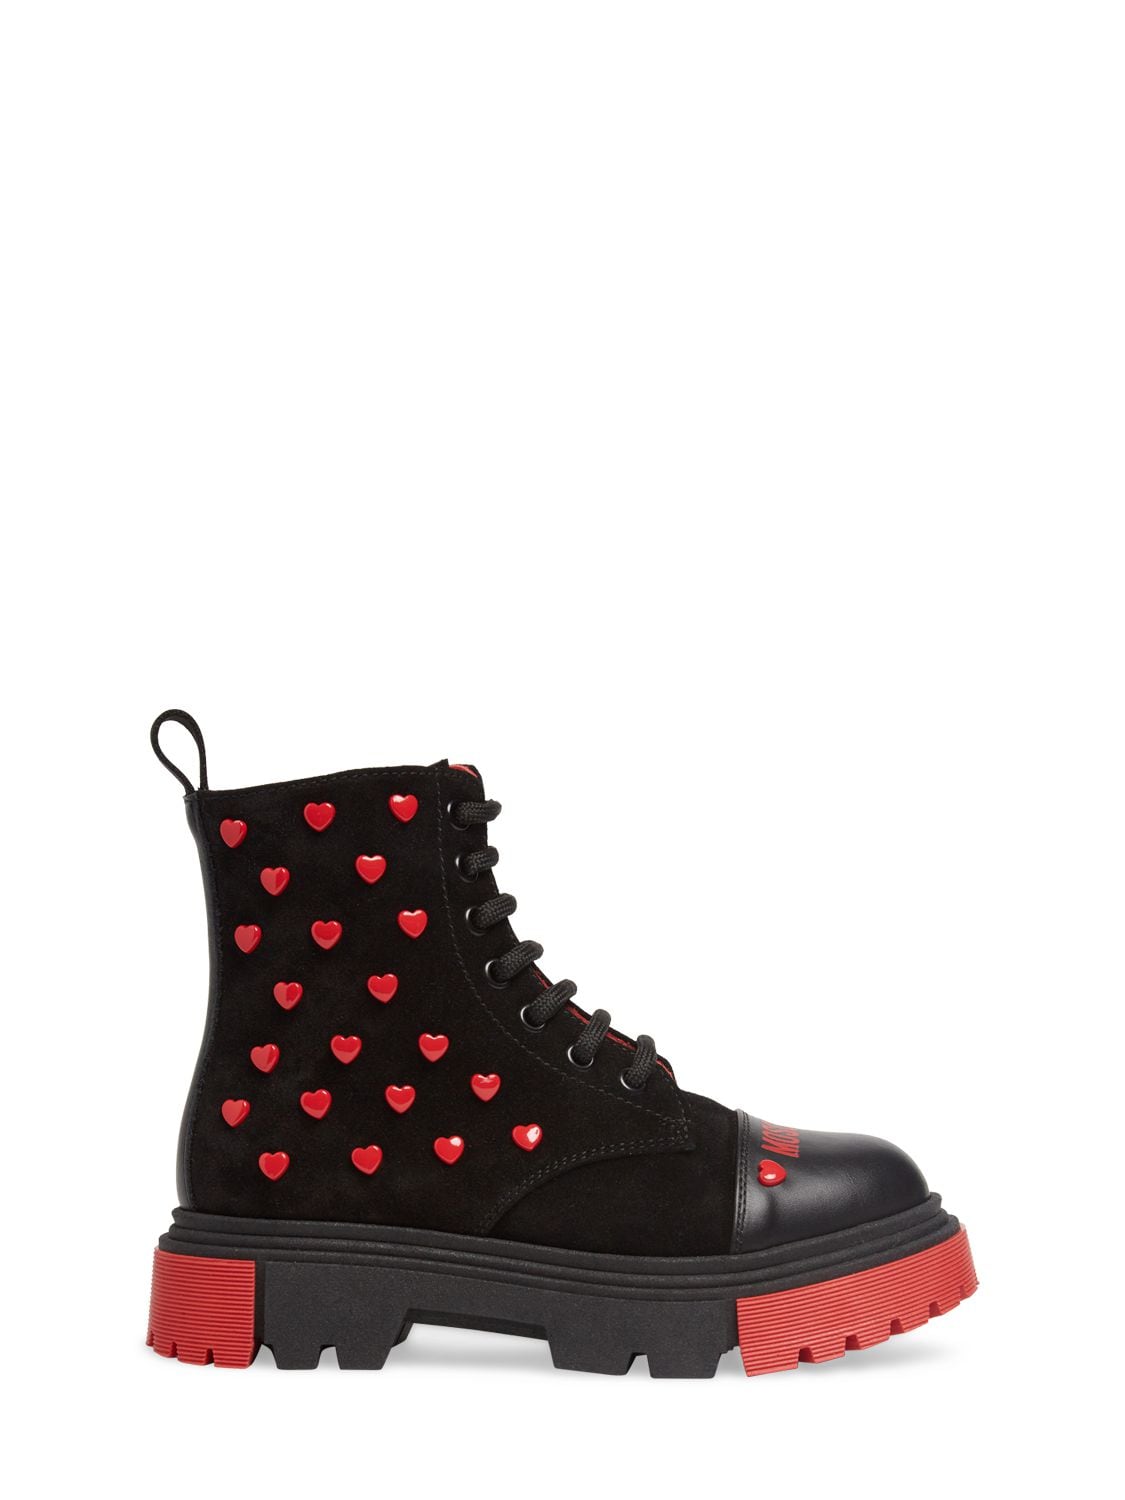 Image of Suede Combat Boots W/hearts